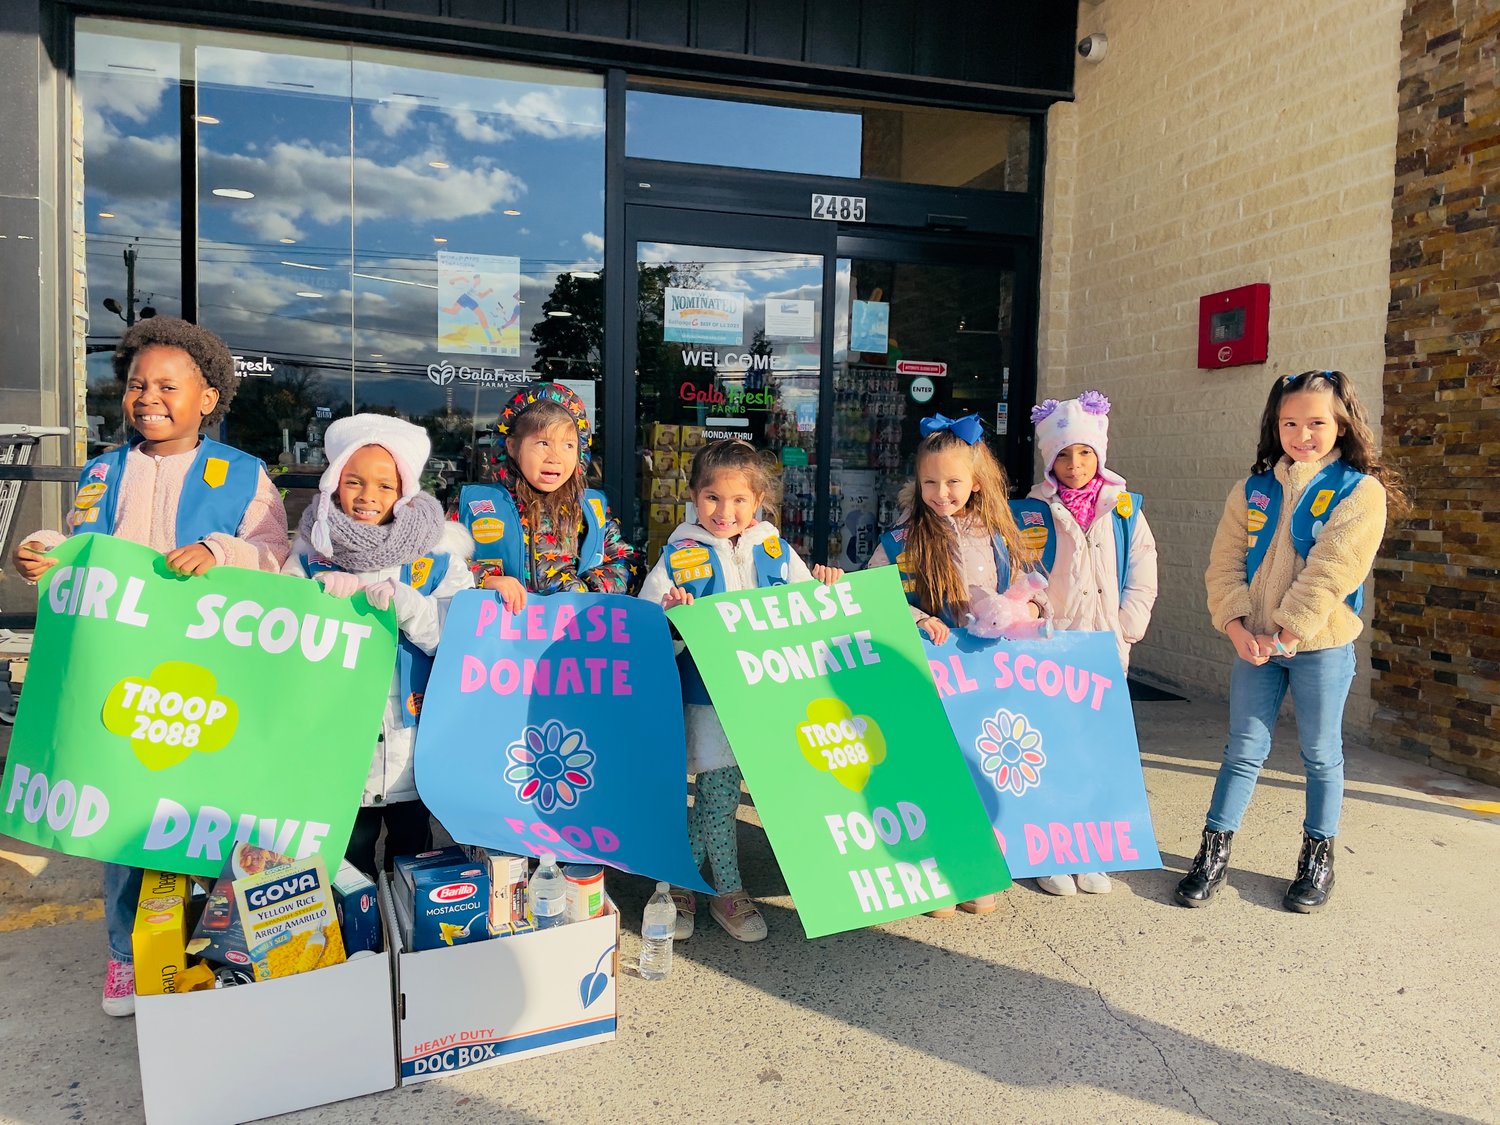 Members of Baldwin Daisy Girl Scout Troop 2088 helped collect food and monetary donations for the needy who visit St. Christopher’s Food Pantry last week.